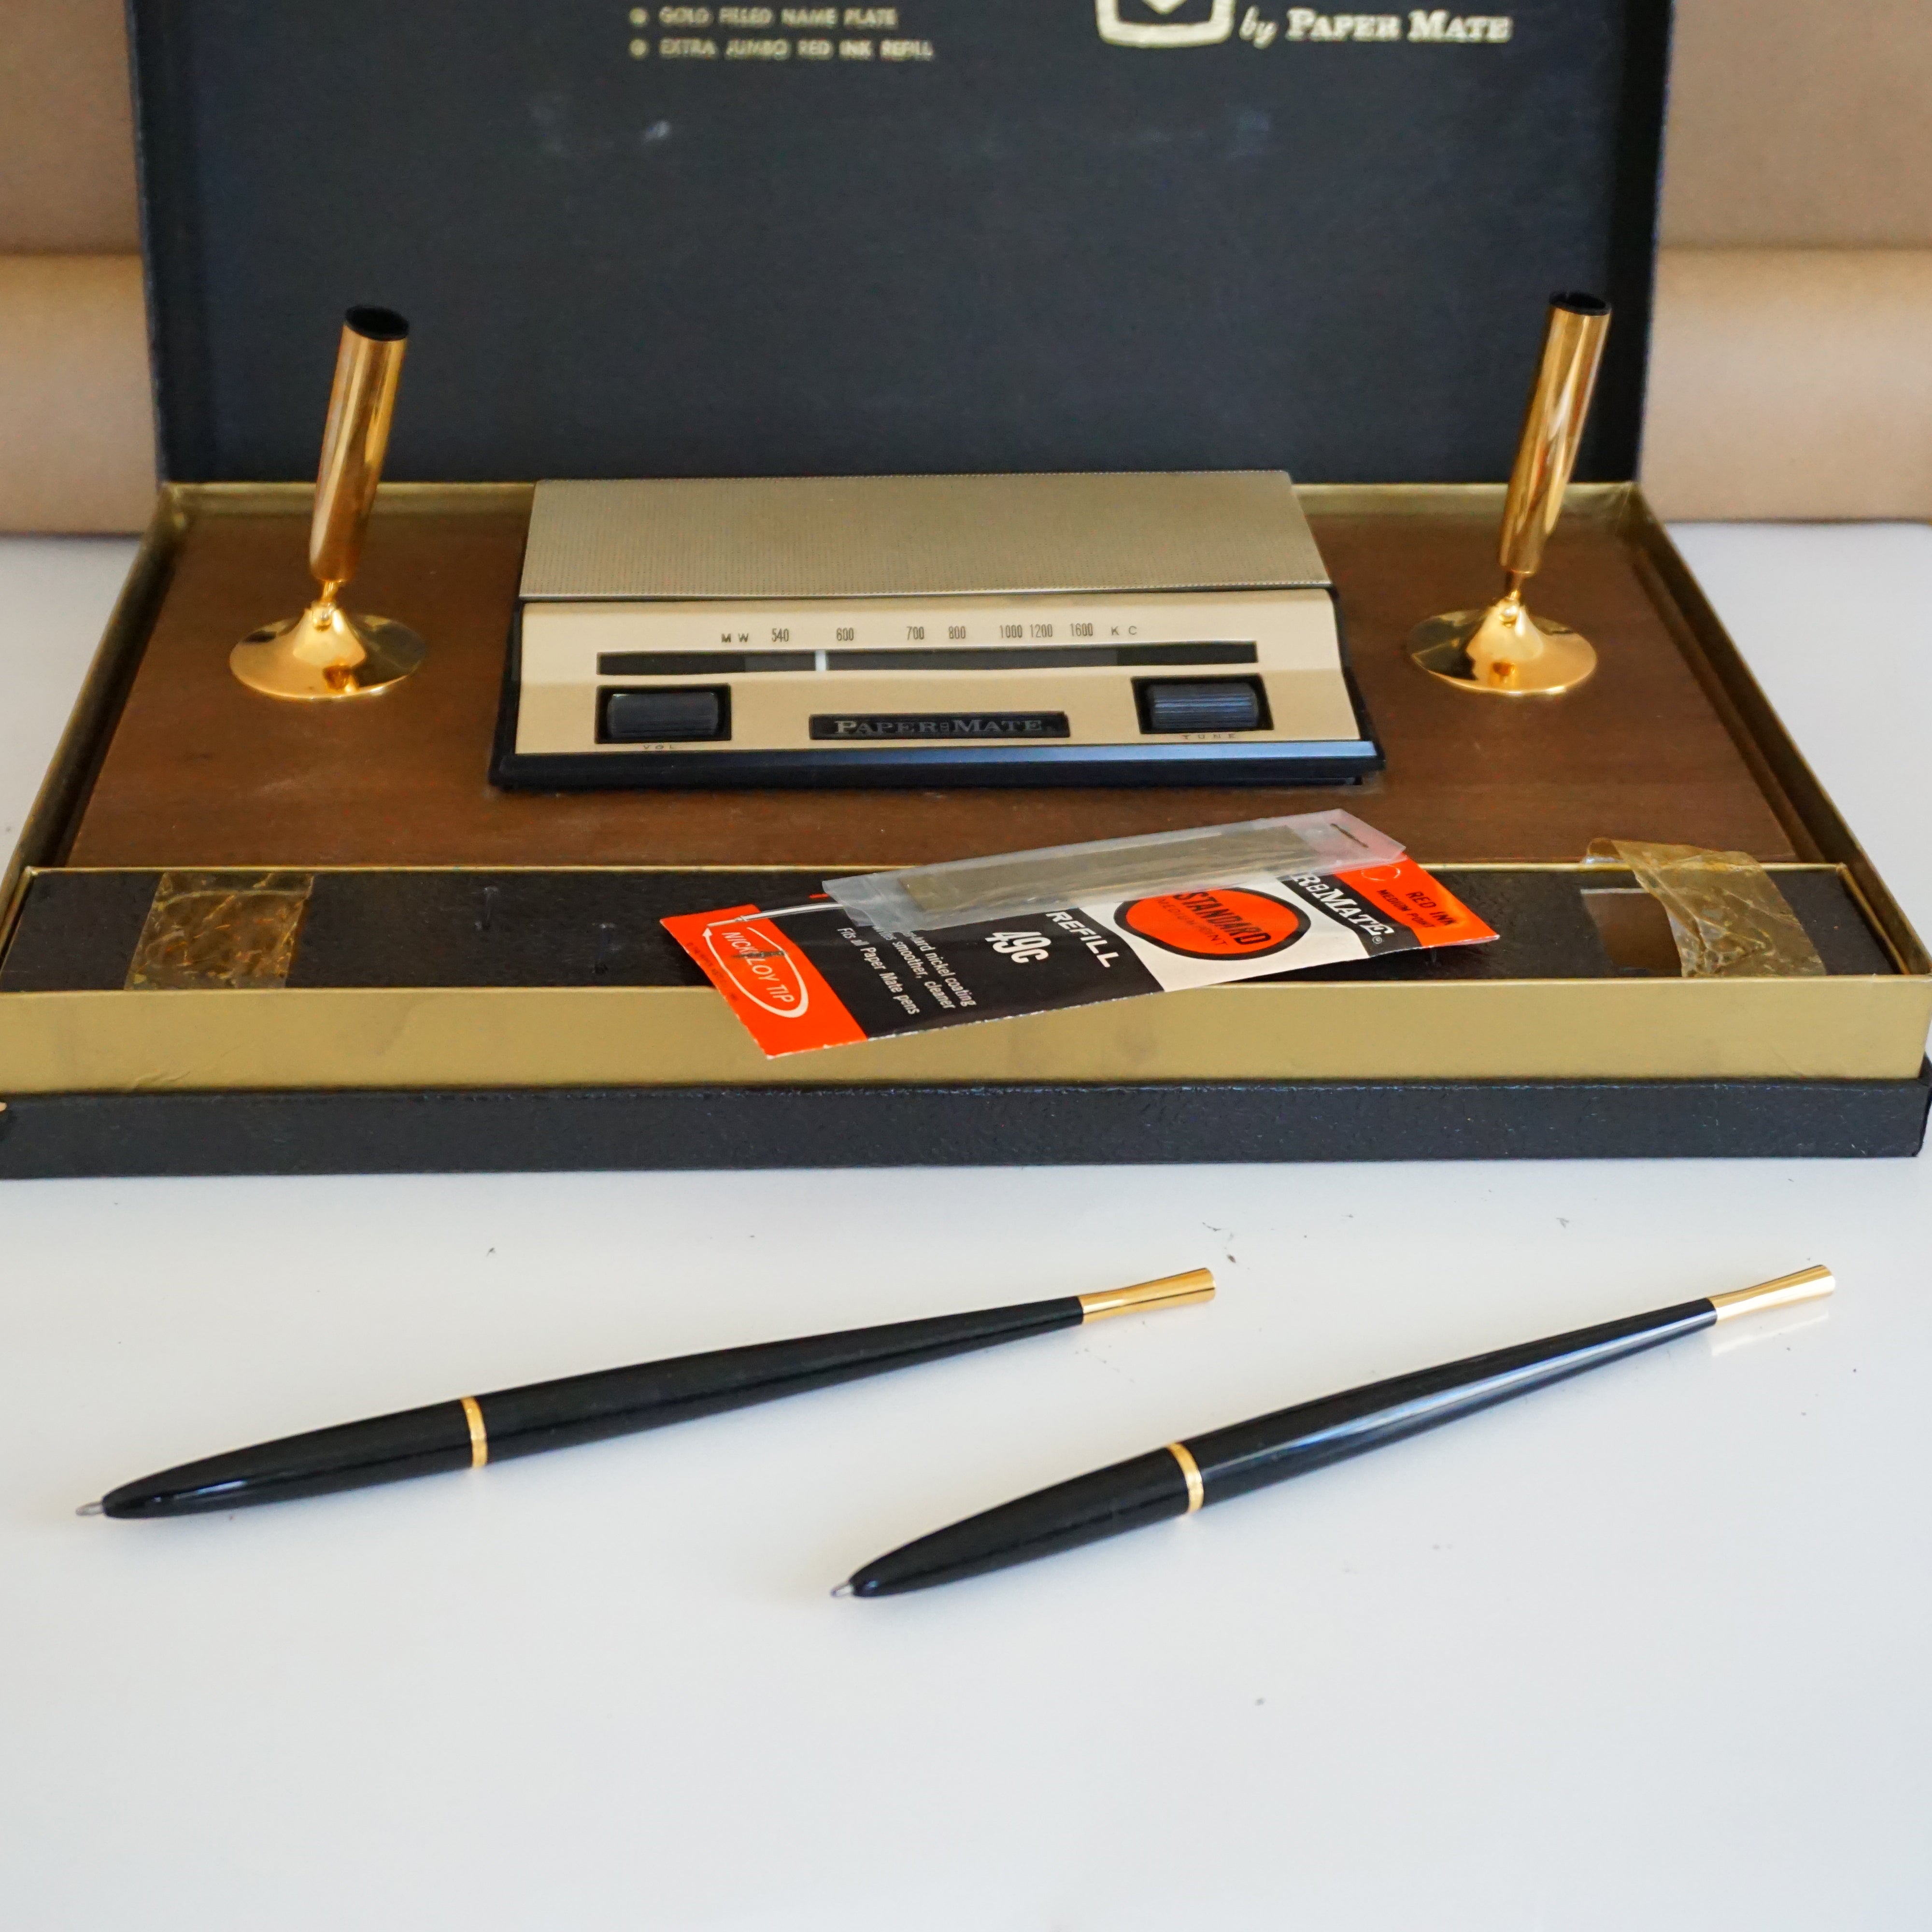 1960s PAPER MATE The Executive Radio Desk Set. With 2 Pens + Gold Nameplate. Vintage